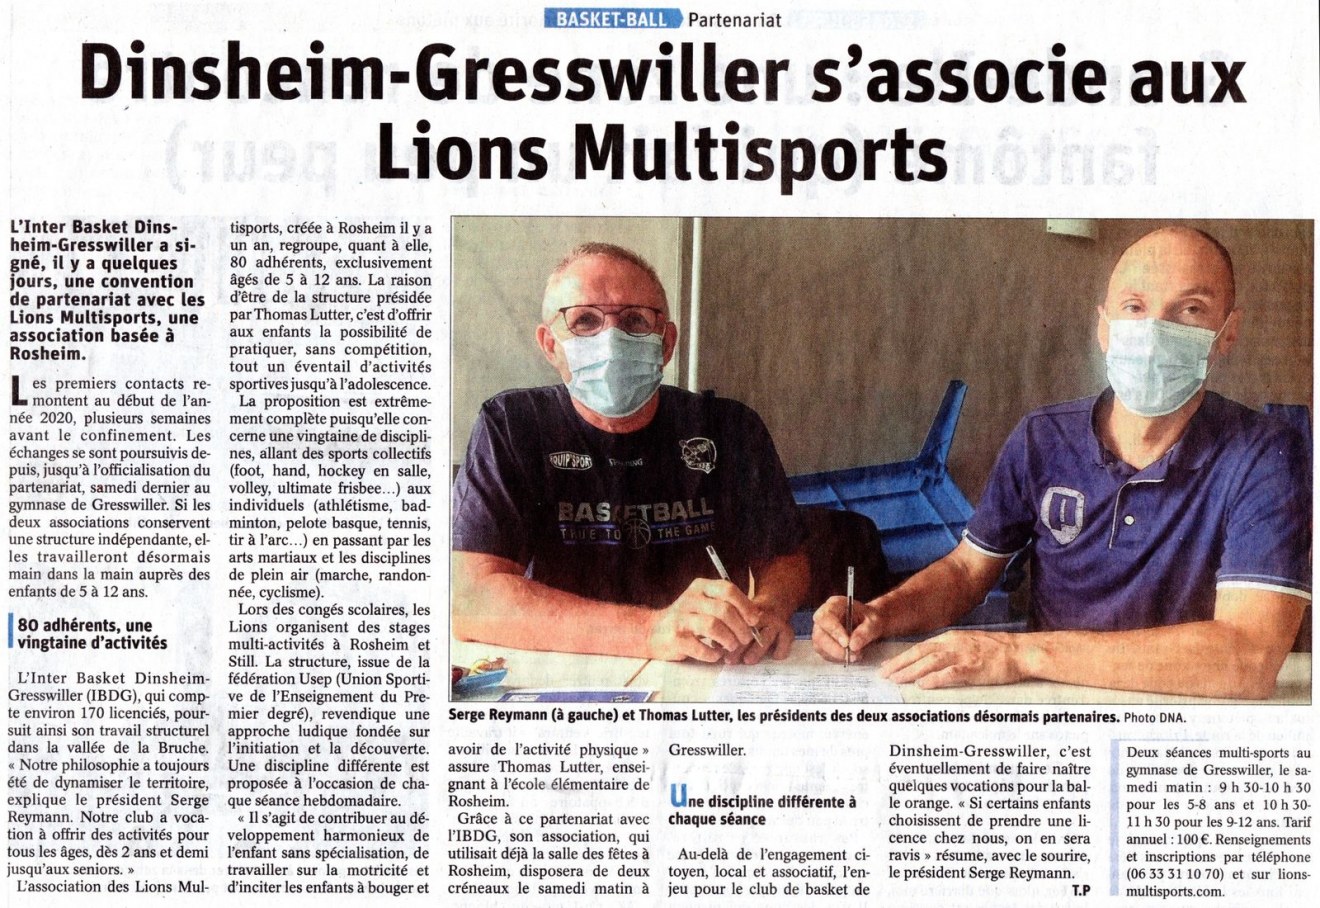 2020-08 DNA IDBG s'associe aux Lions Multisports